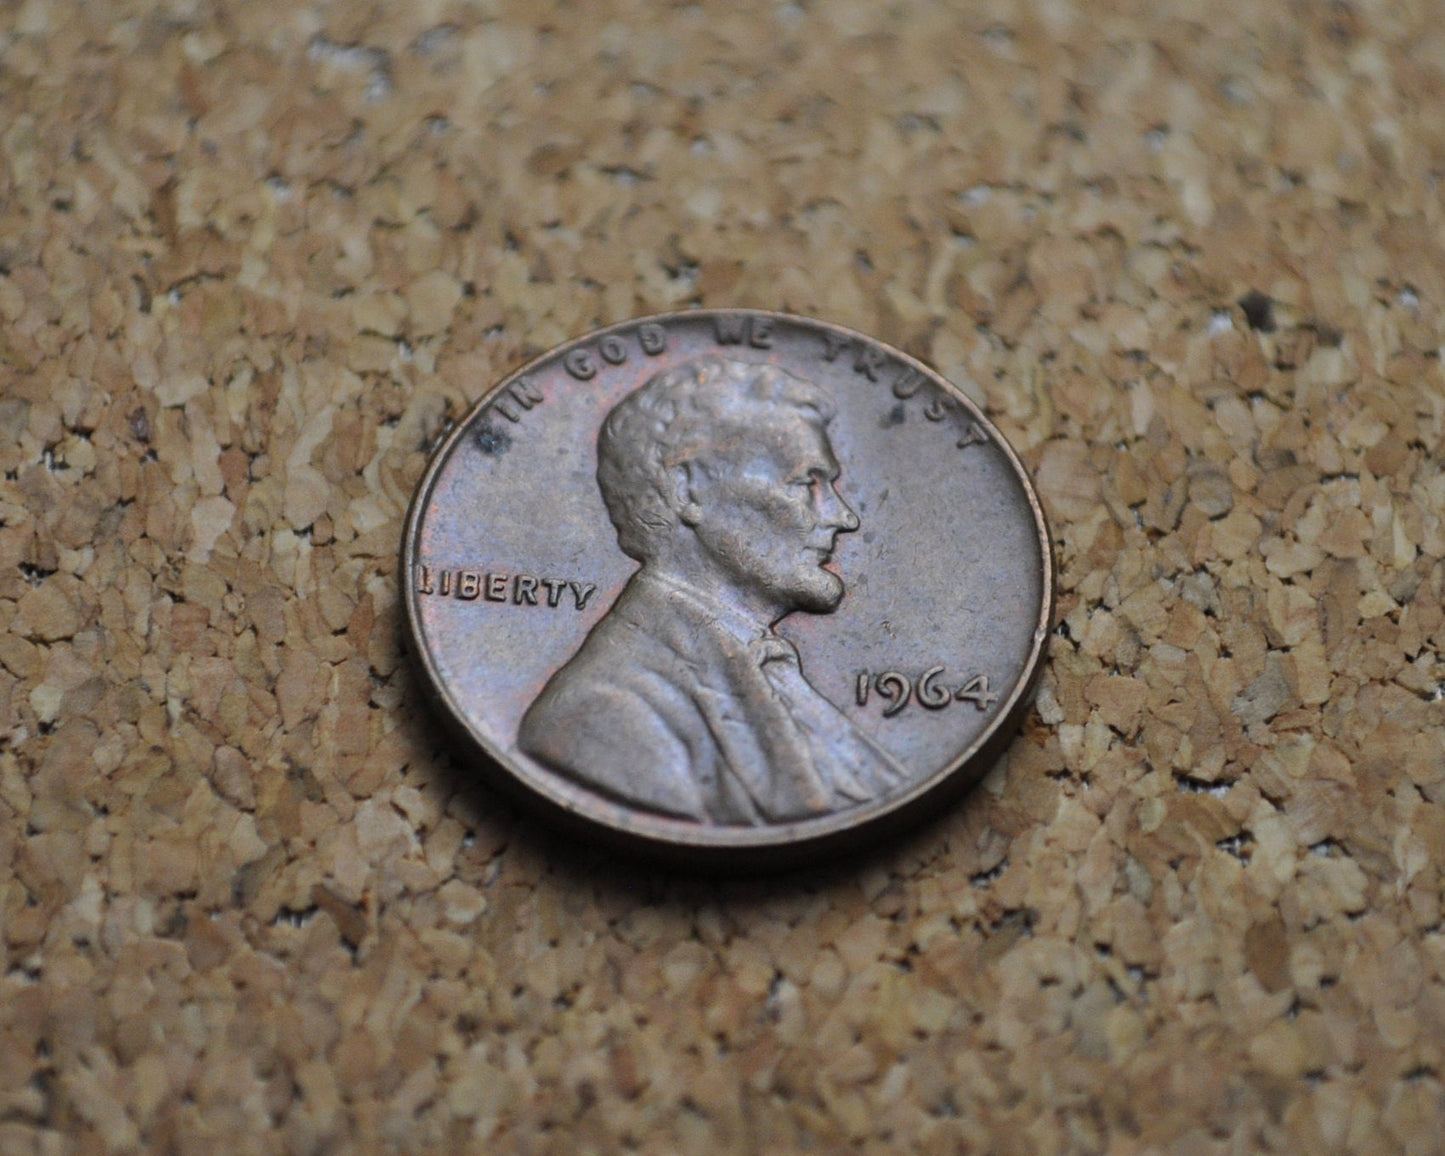 1964 Memorial Penny - Excellent Condition - 57th Anniversary - Collectible Coin